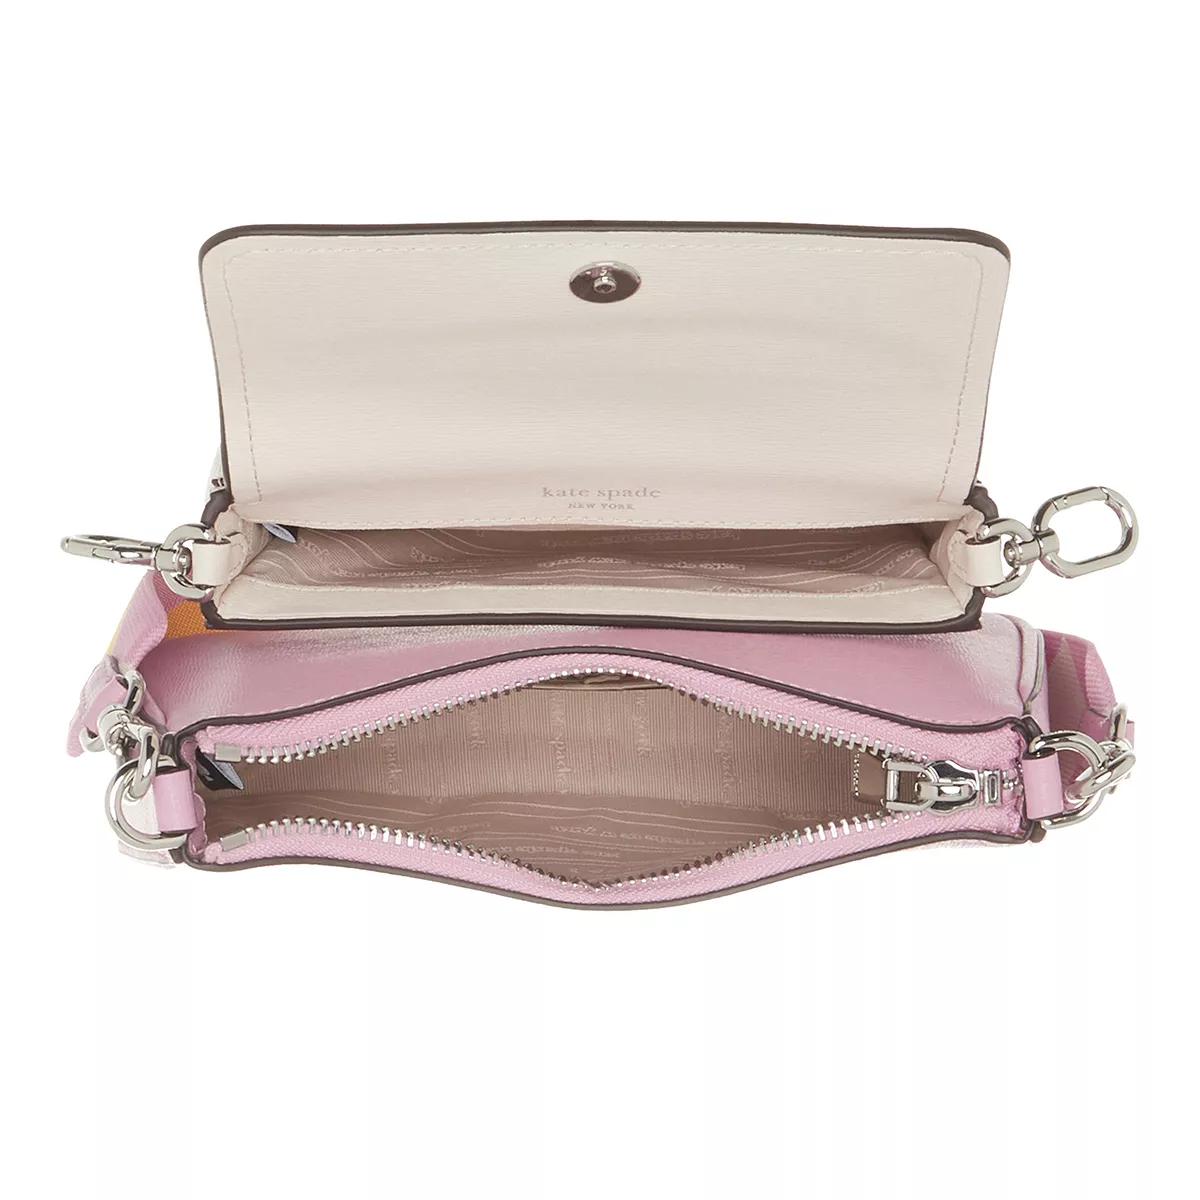 kate spade new york Crossbody bags Double Up Colorblocked Saffiano Leather in poeder roze